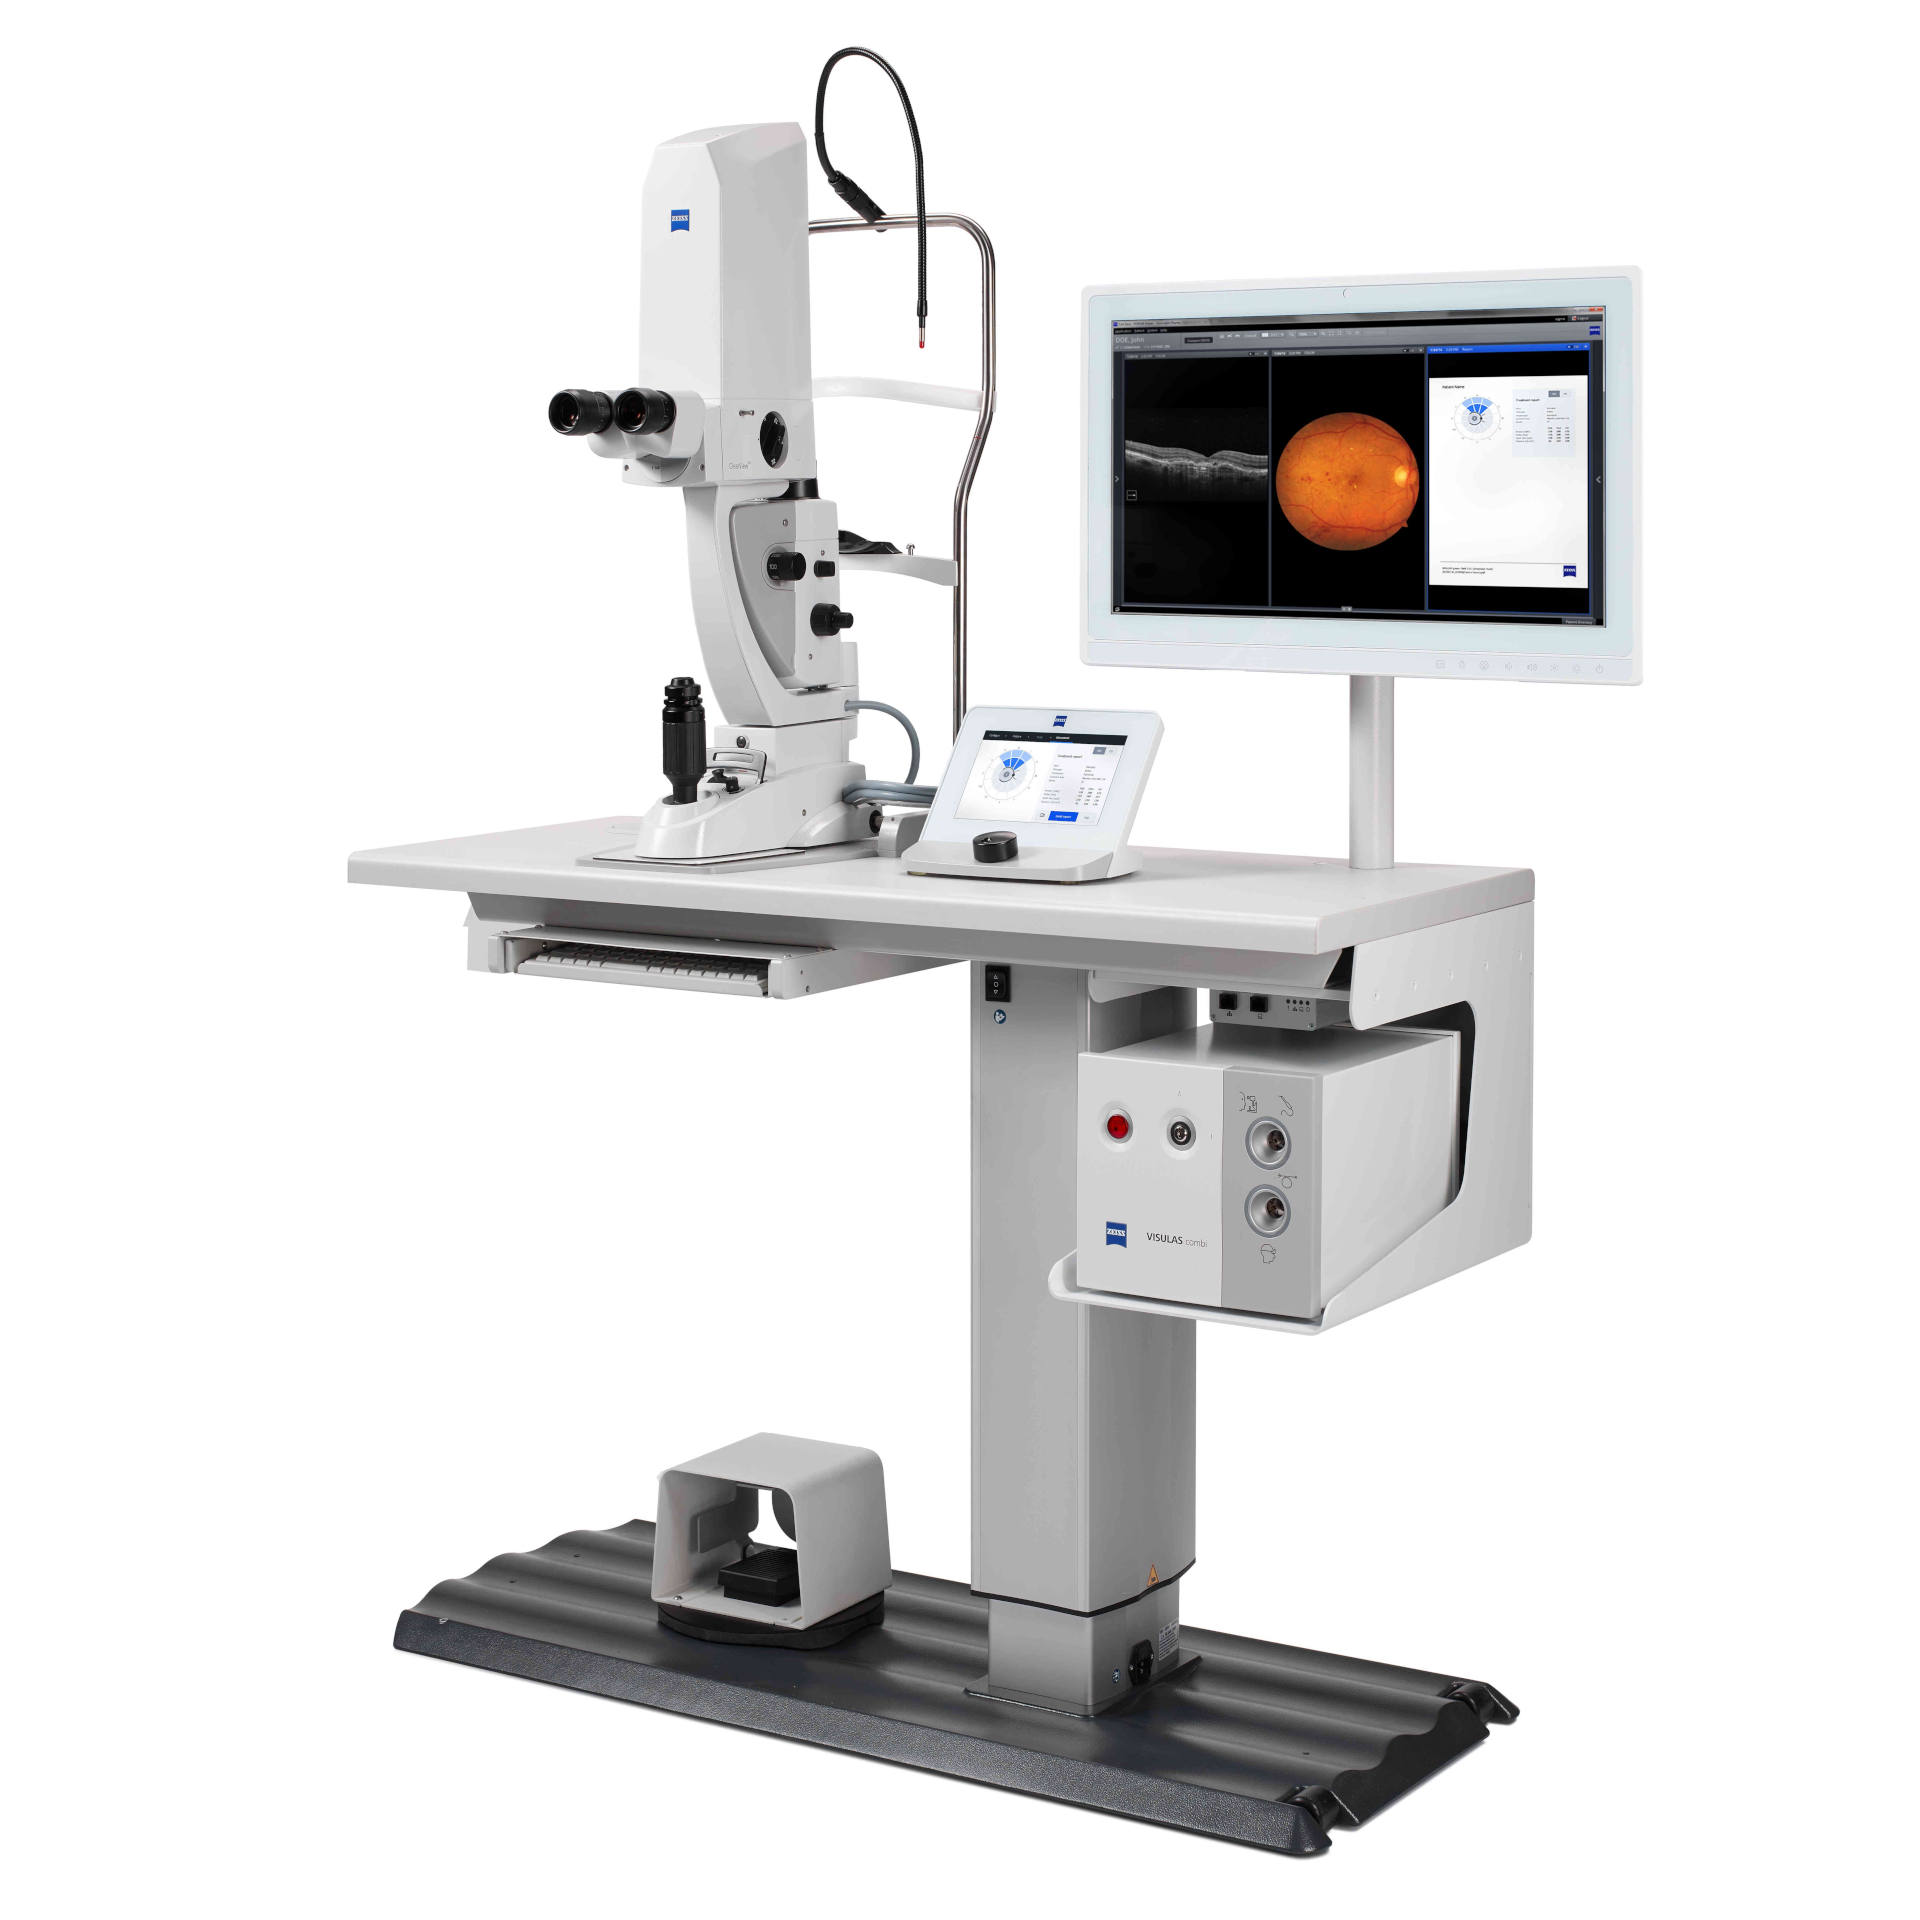 The compact workstation for Retina, Cataract and  Glaucoma workflows.